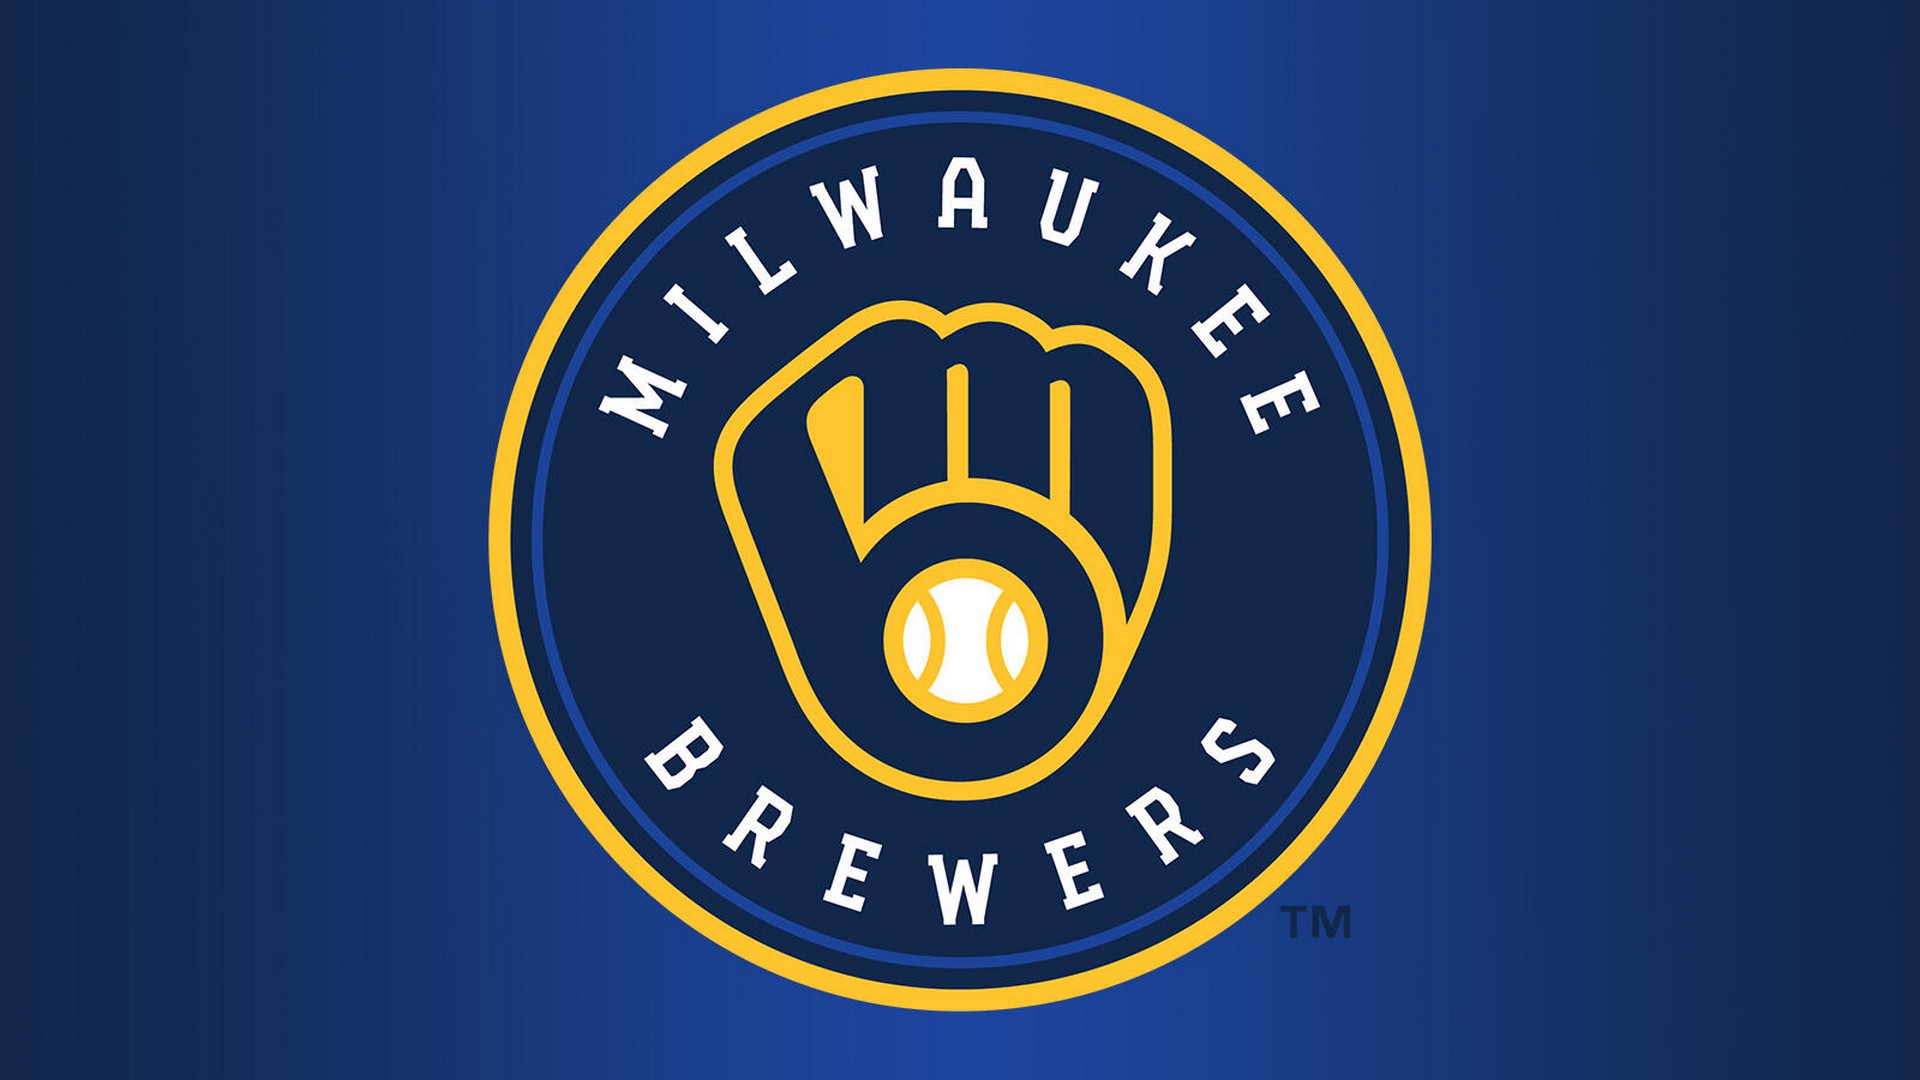 HD Backgrounds Milwaukee Brewers with high-resolution 1920x1080 pixel. You can use this wallpaper for Mac Desktop Wallpaper, Laptop Screensavers, Android Wallpapers, Tablet or iPhone Home Screen and another mobile phone device